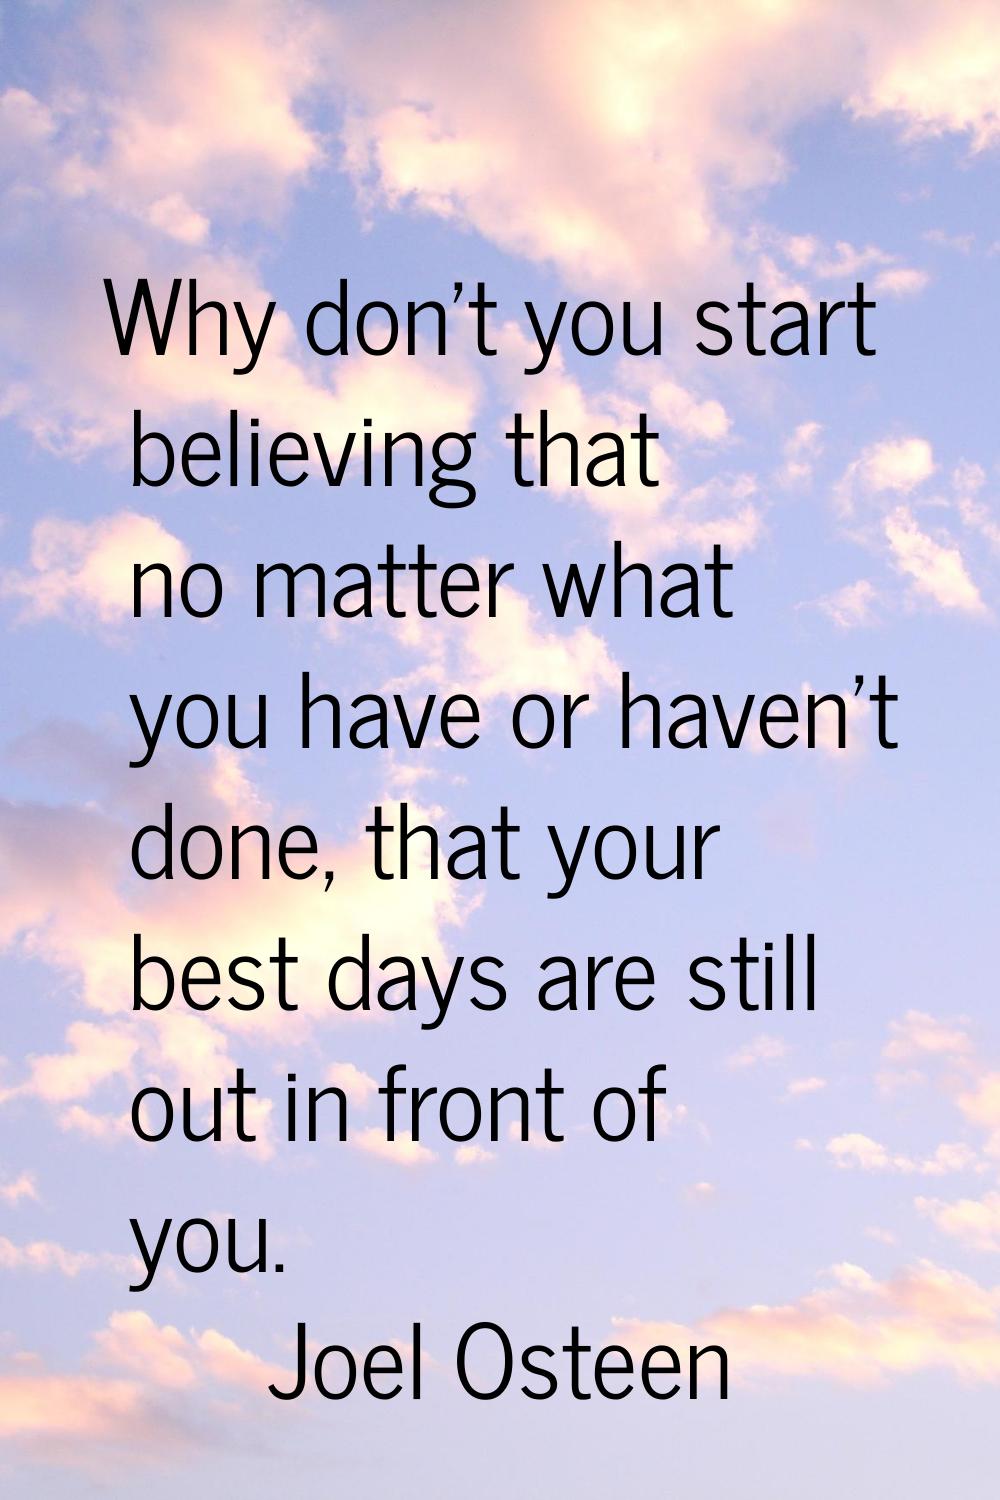 Why don't you start believing that no matter what you have or haven't done, that your best days are